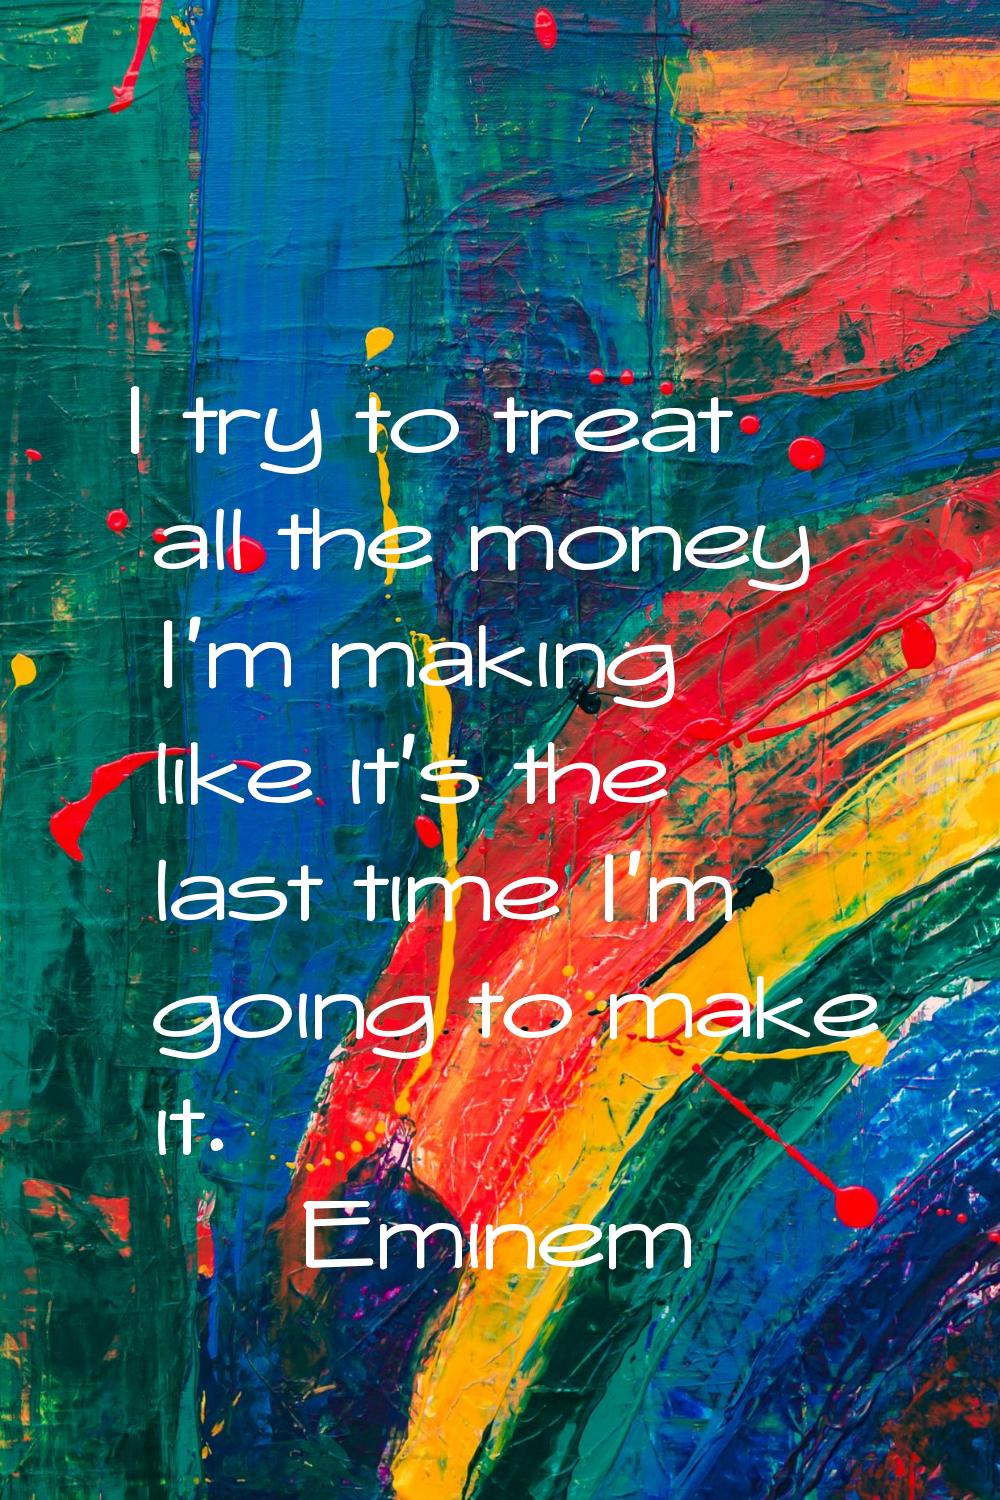 I try to treat all the money I'm making like it's the last time I'm going to make it.